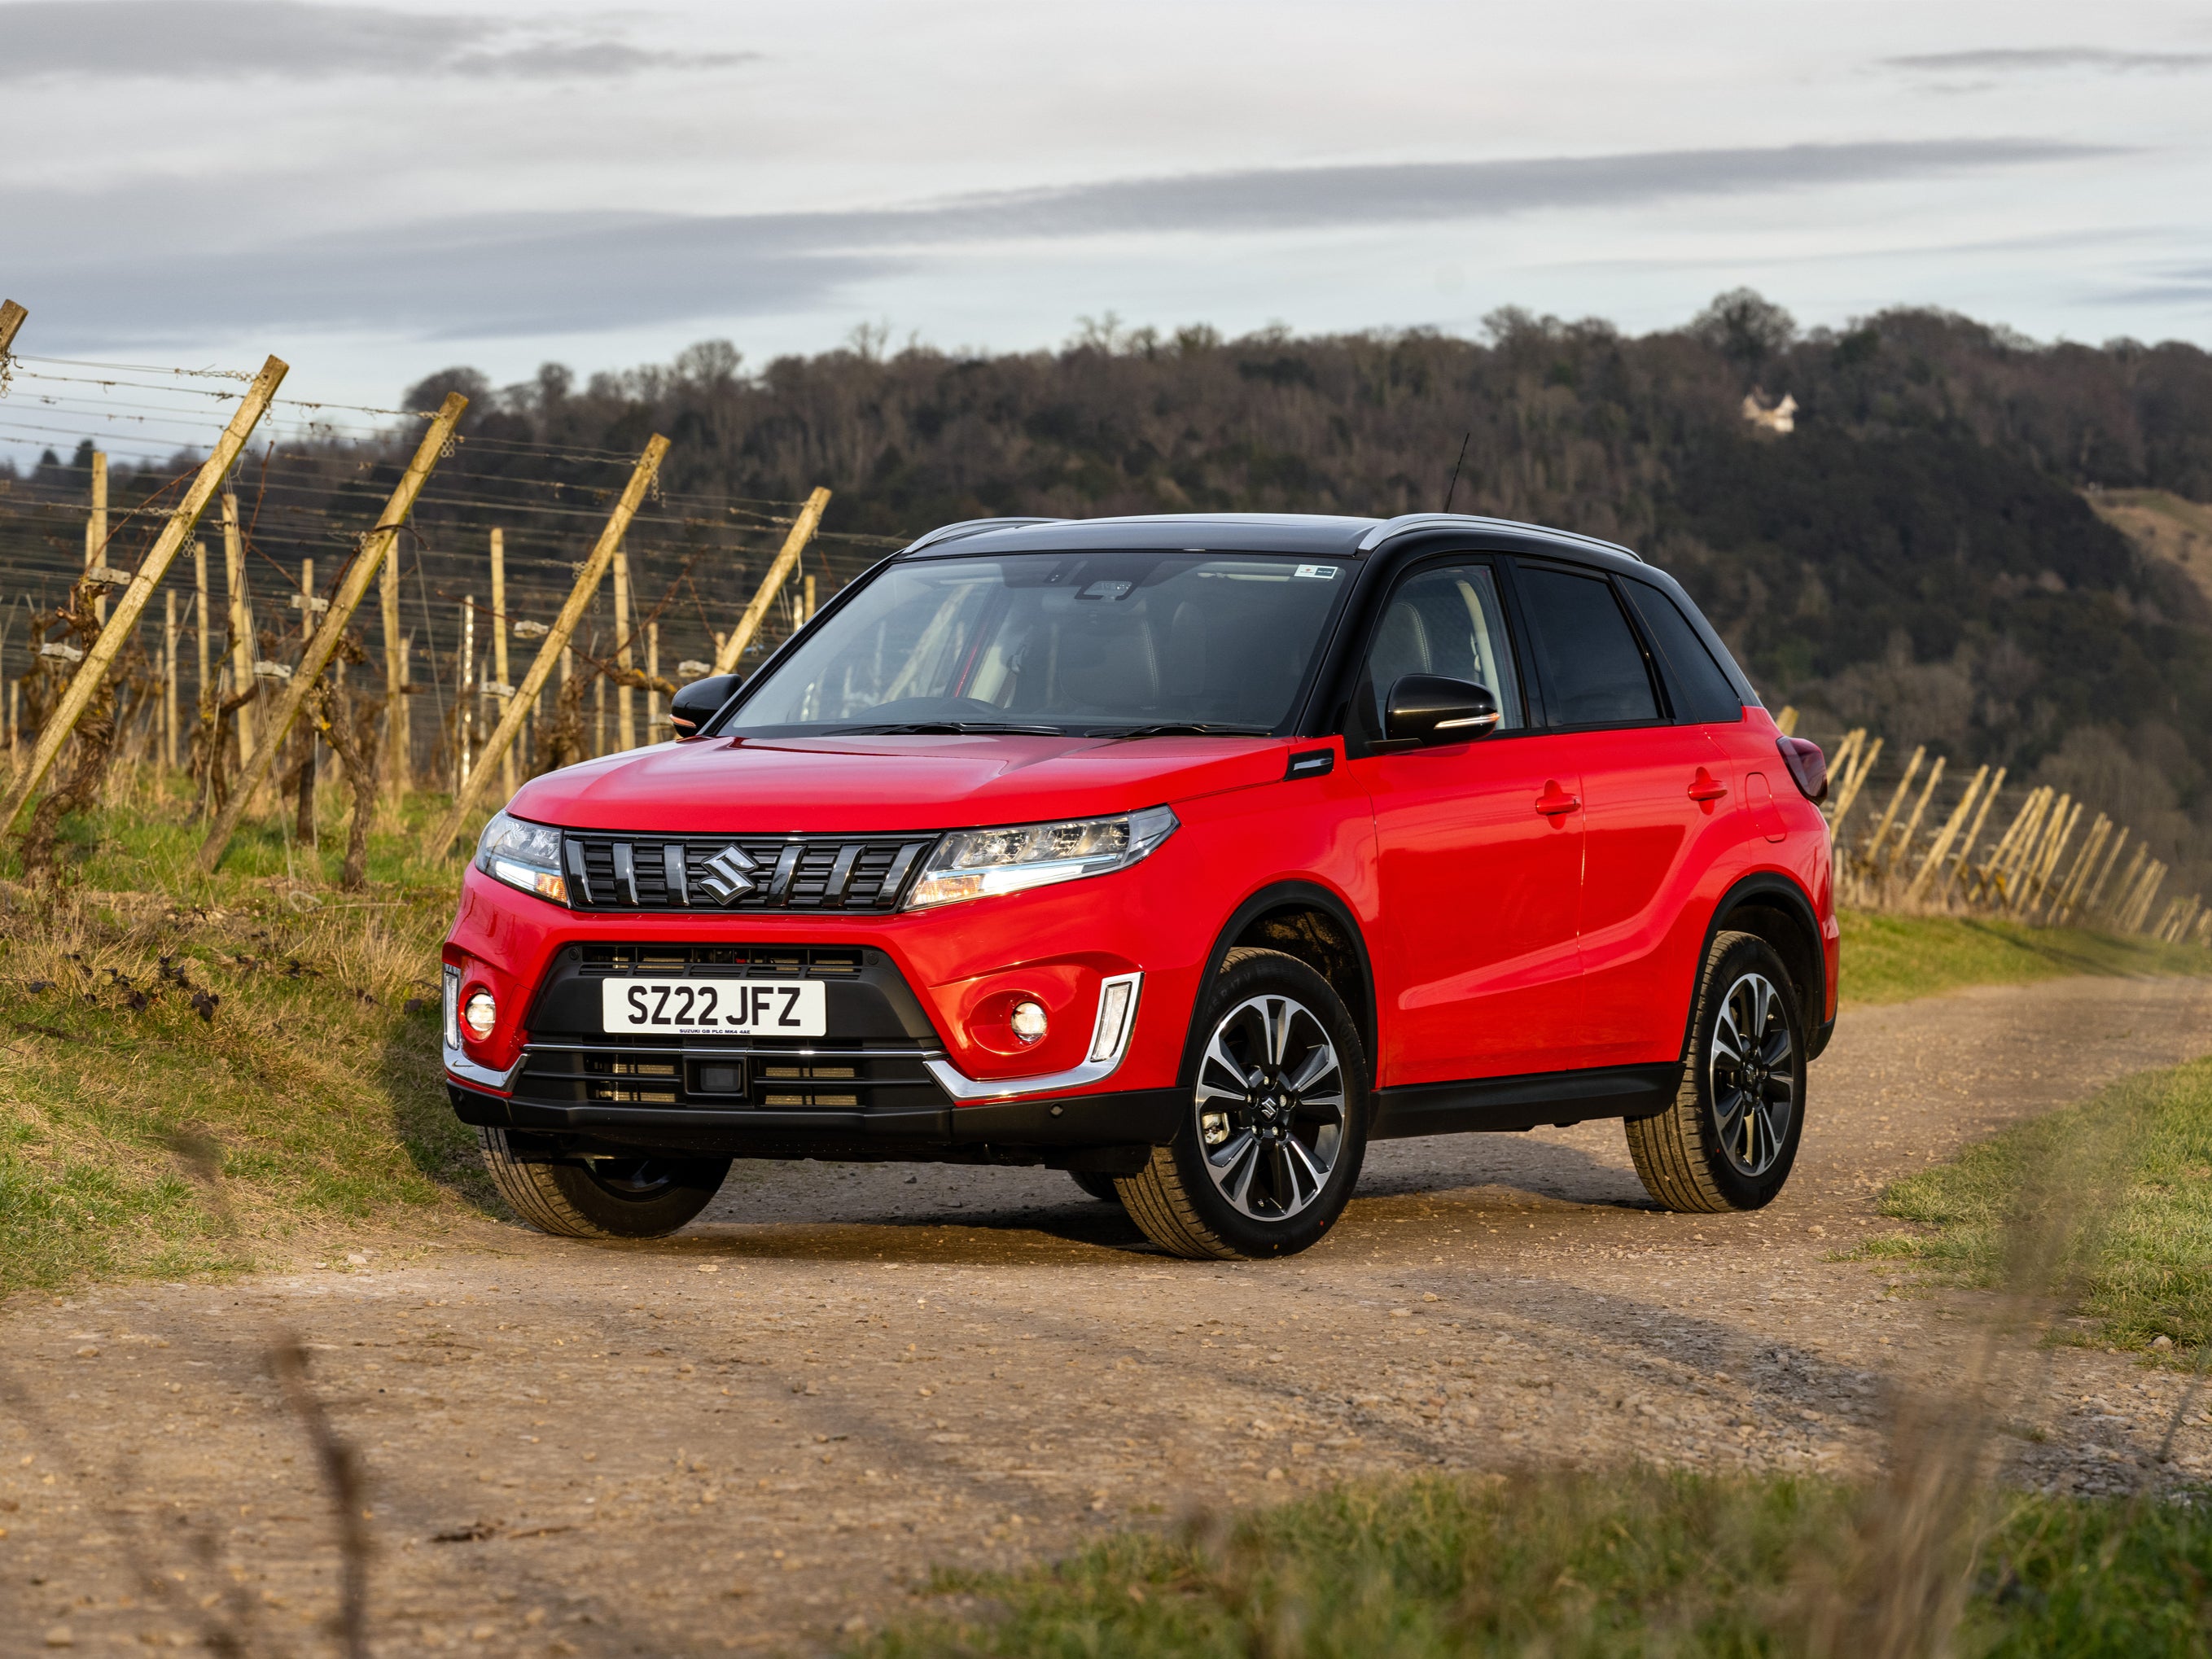 The Vitara’s styling is much more conventional boxy SUV than the current fad for coupe lines